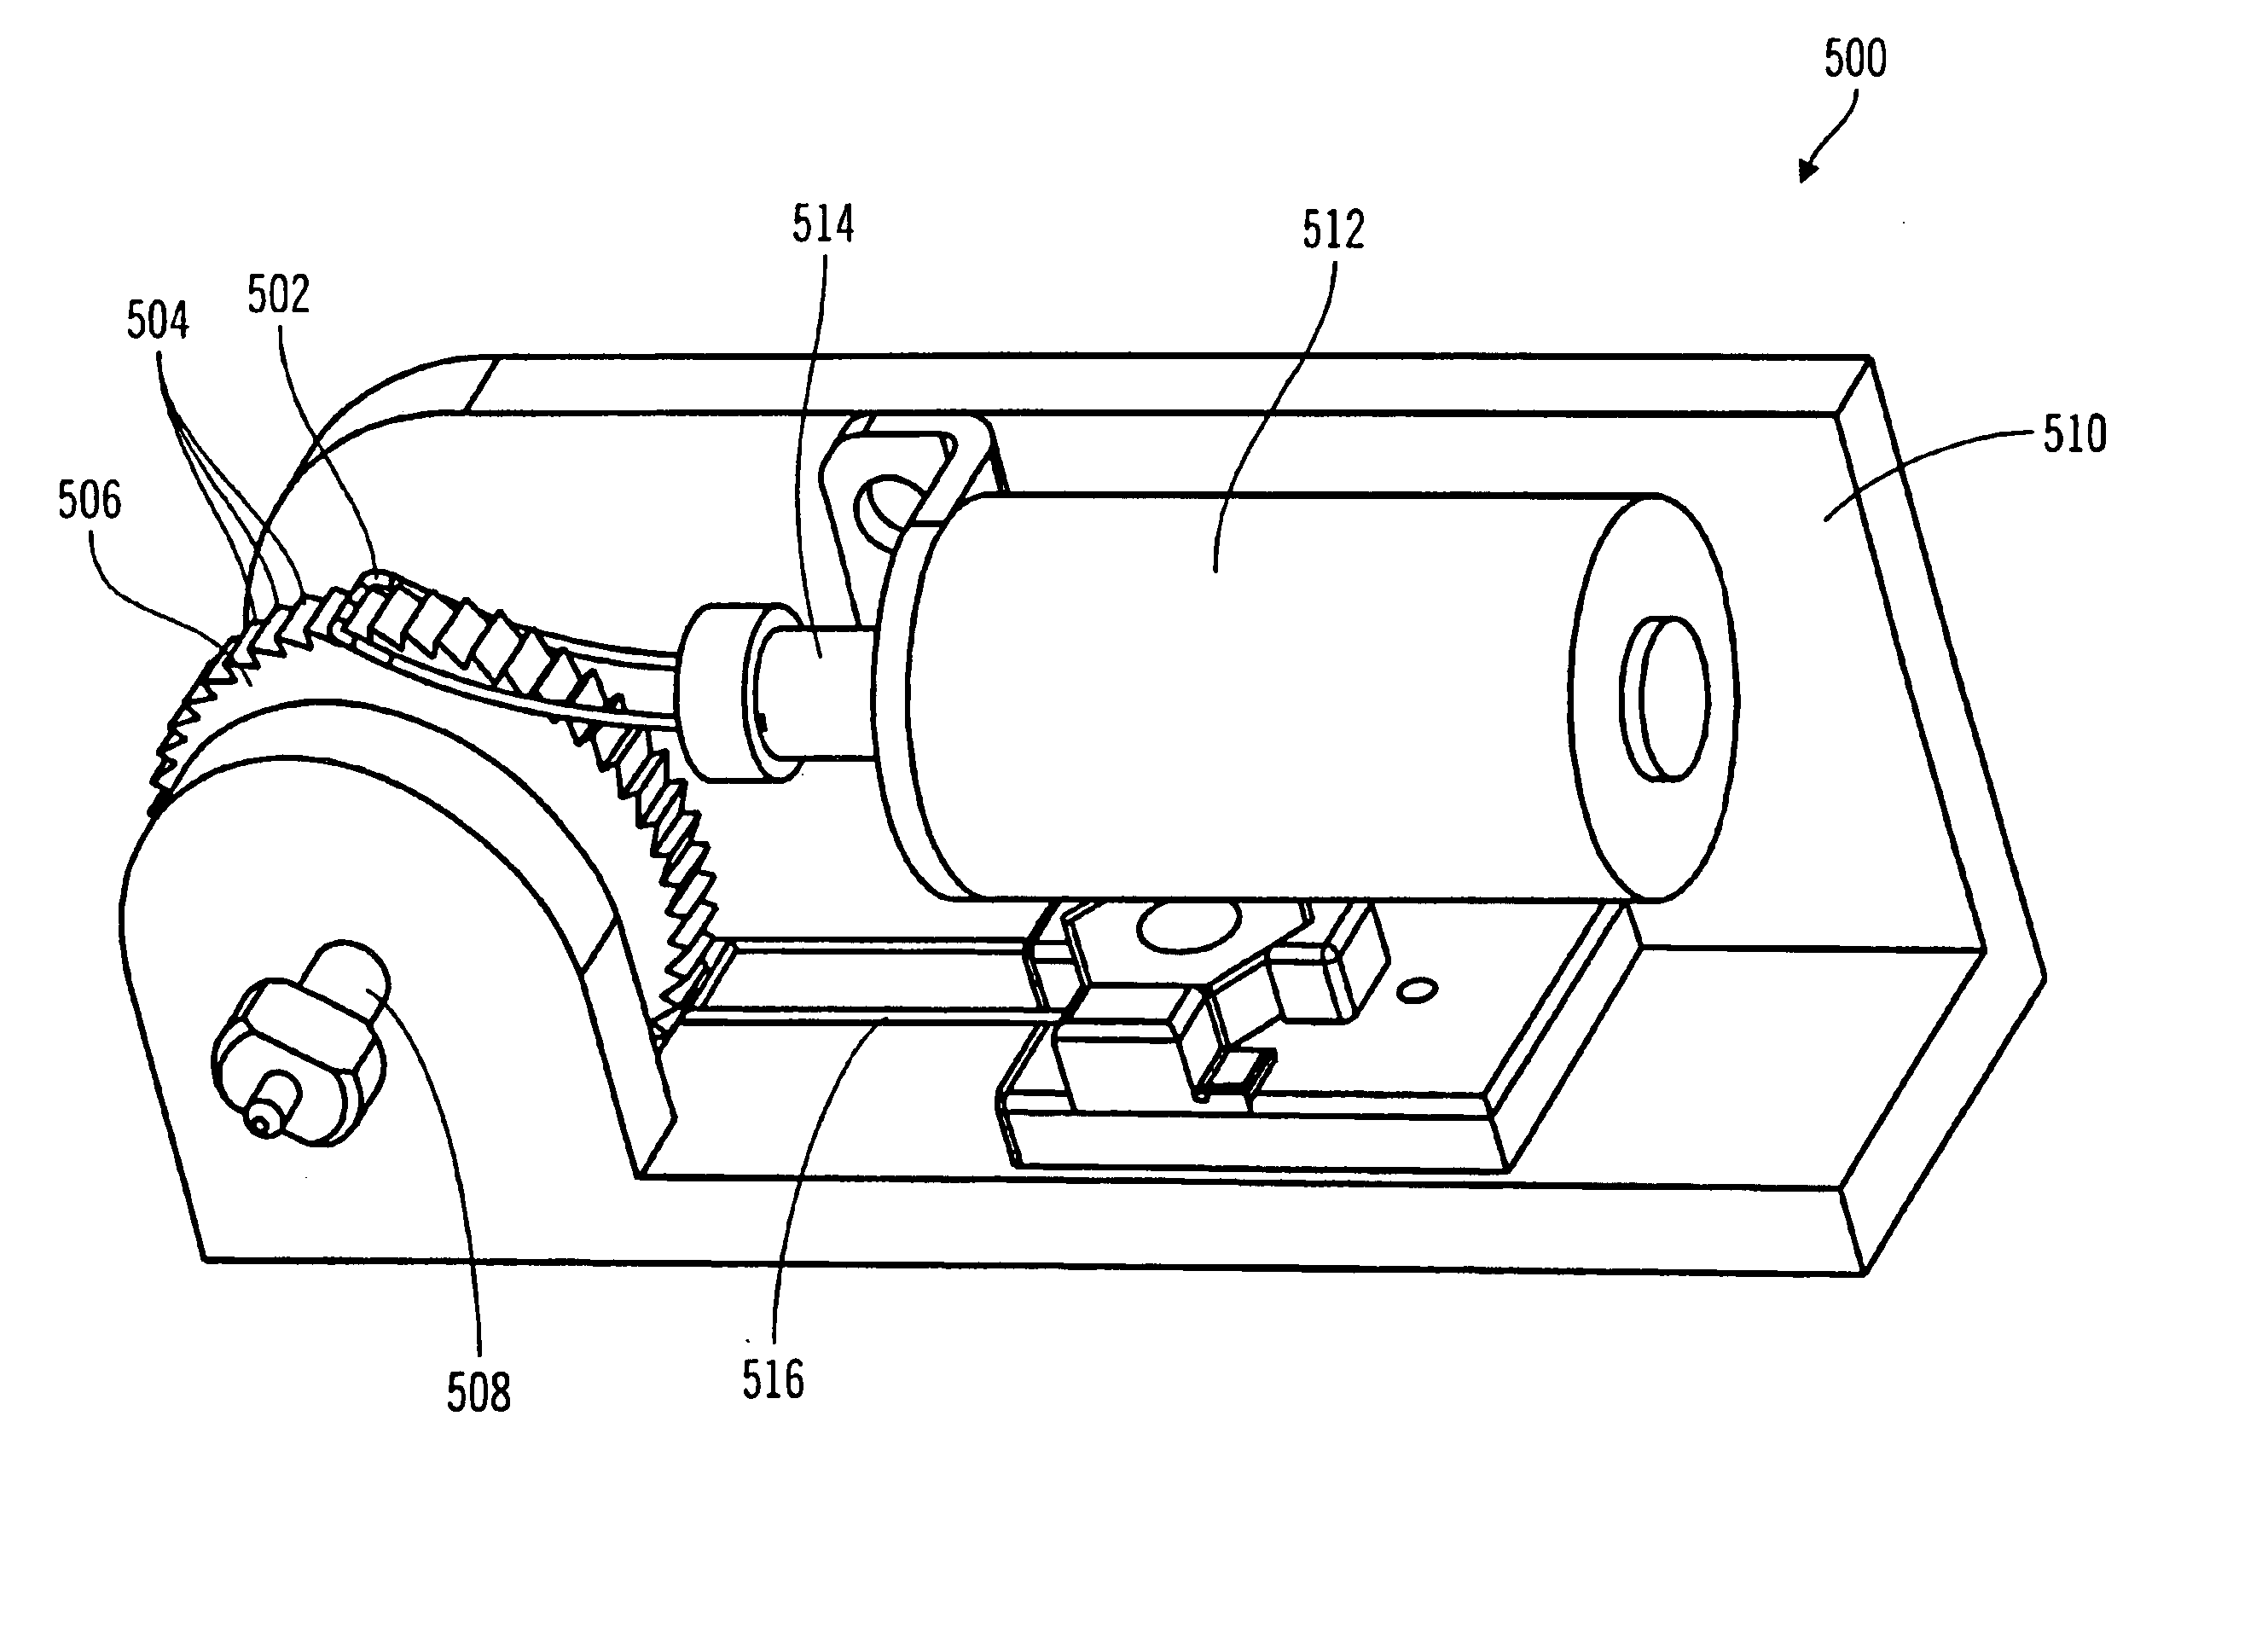 Shape memory alloy wire driven positive displacement micropump with pulsatile output